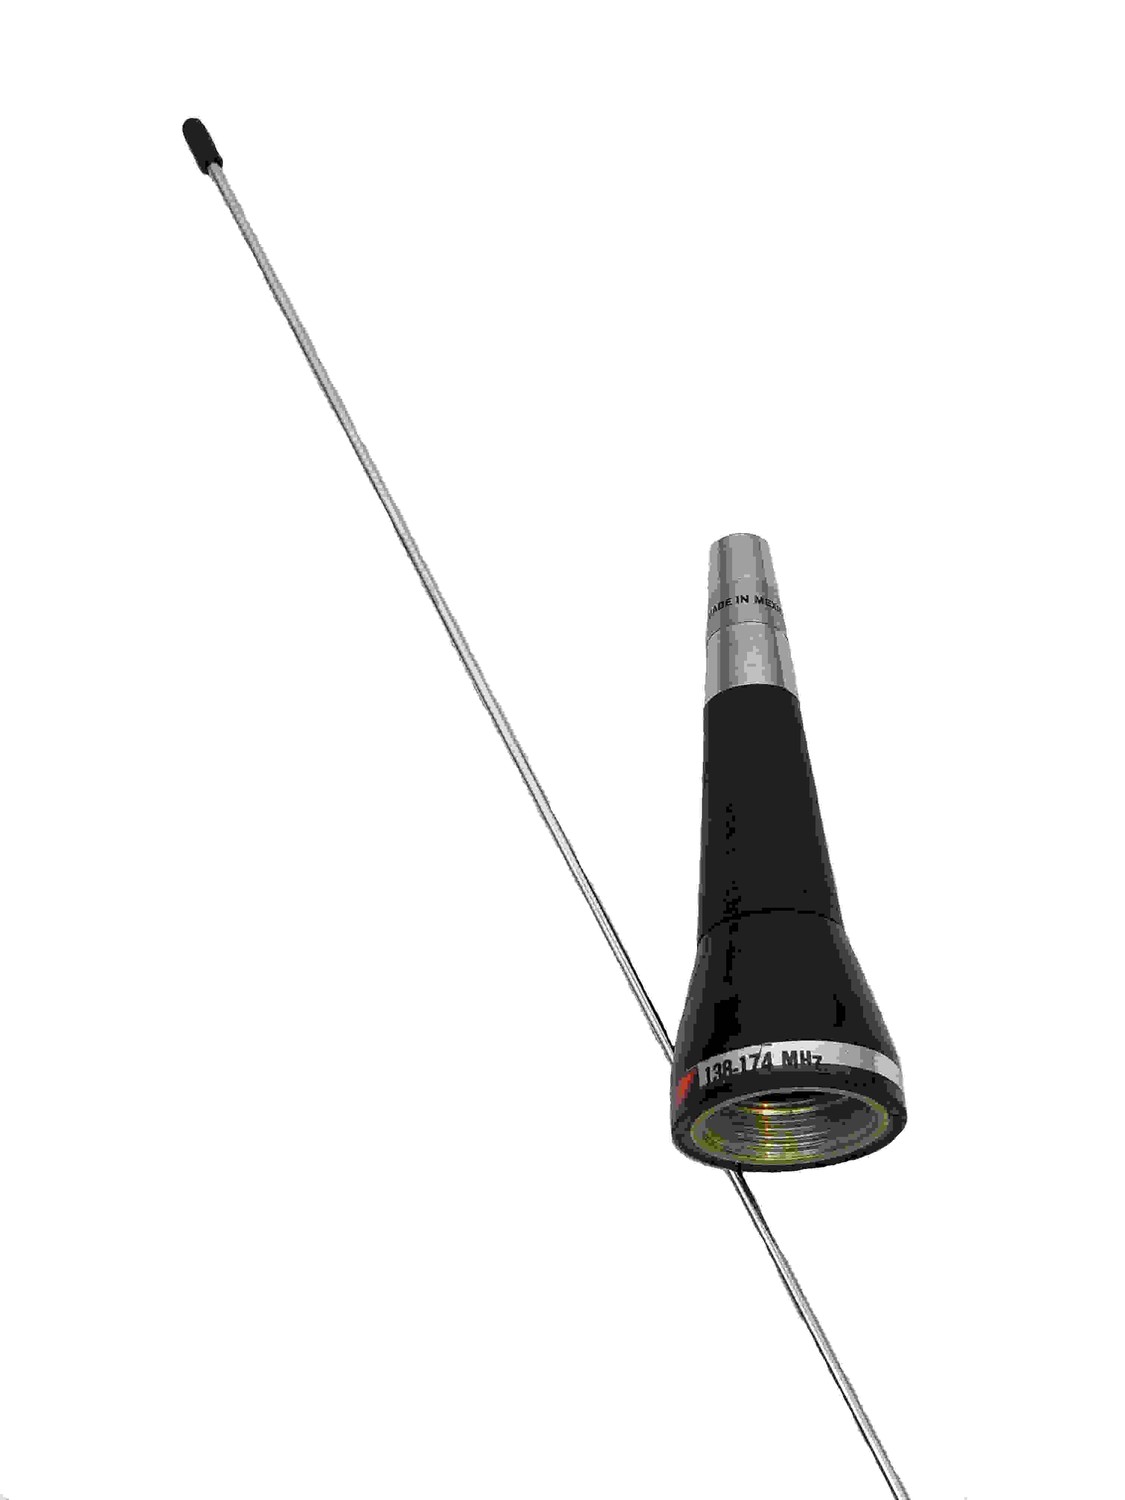 Antenna Specialists - Nmo Style Vhf Antenna With Spring